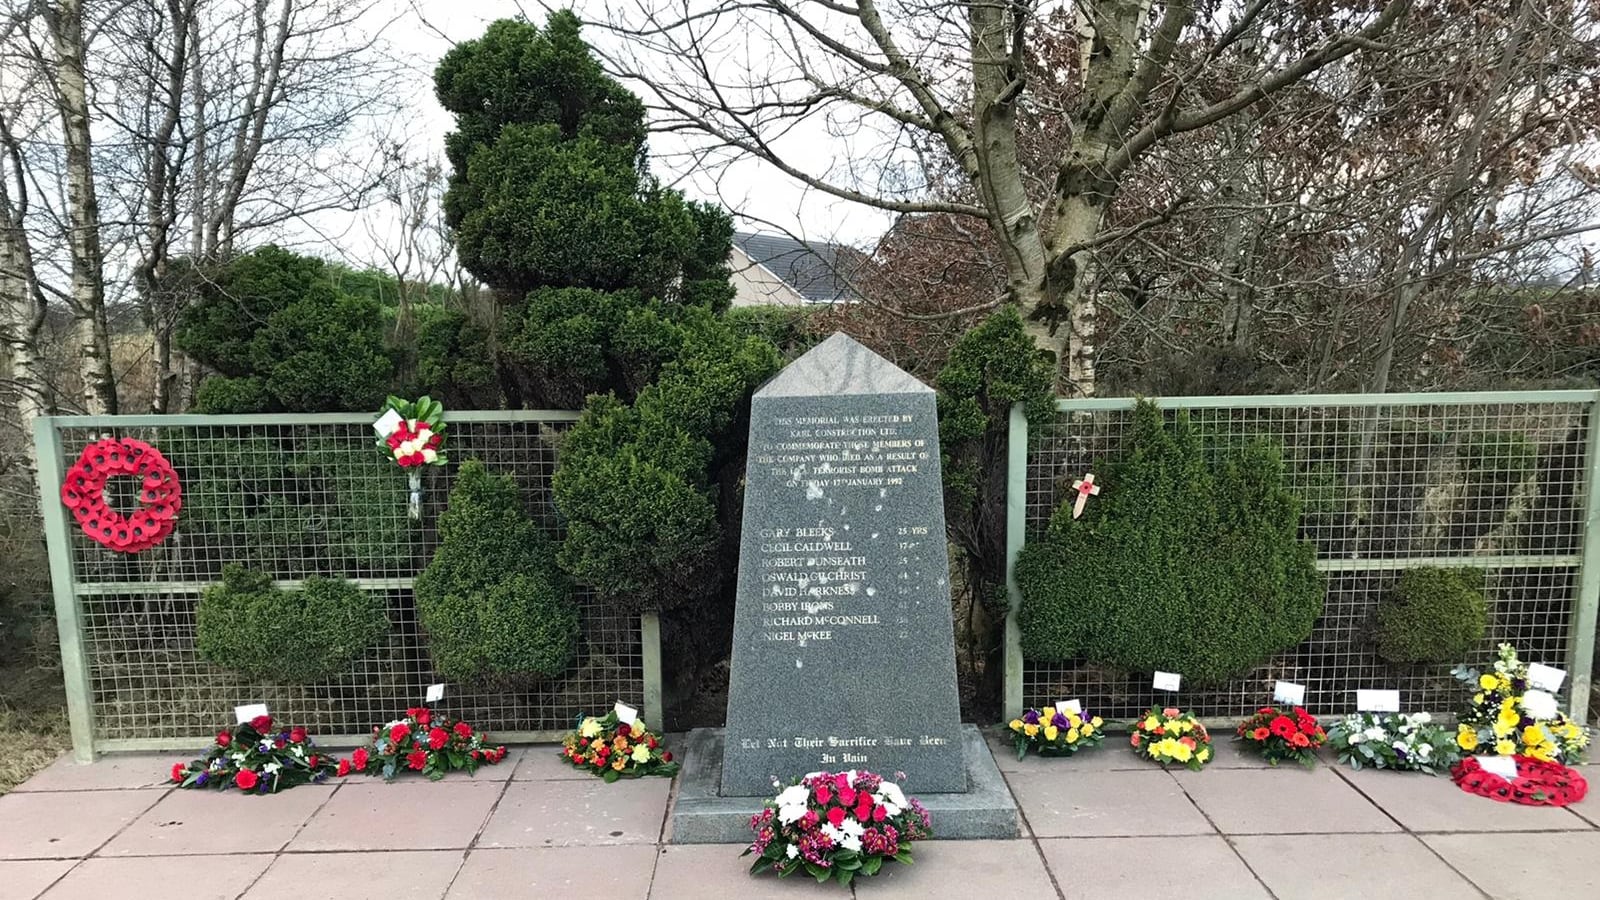 The memorial to remember the victims of the Teebane bombing